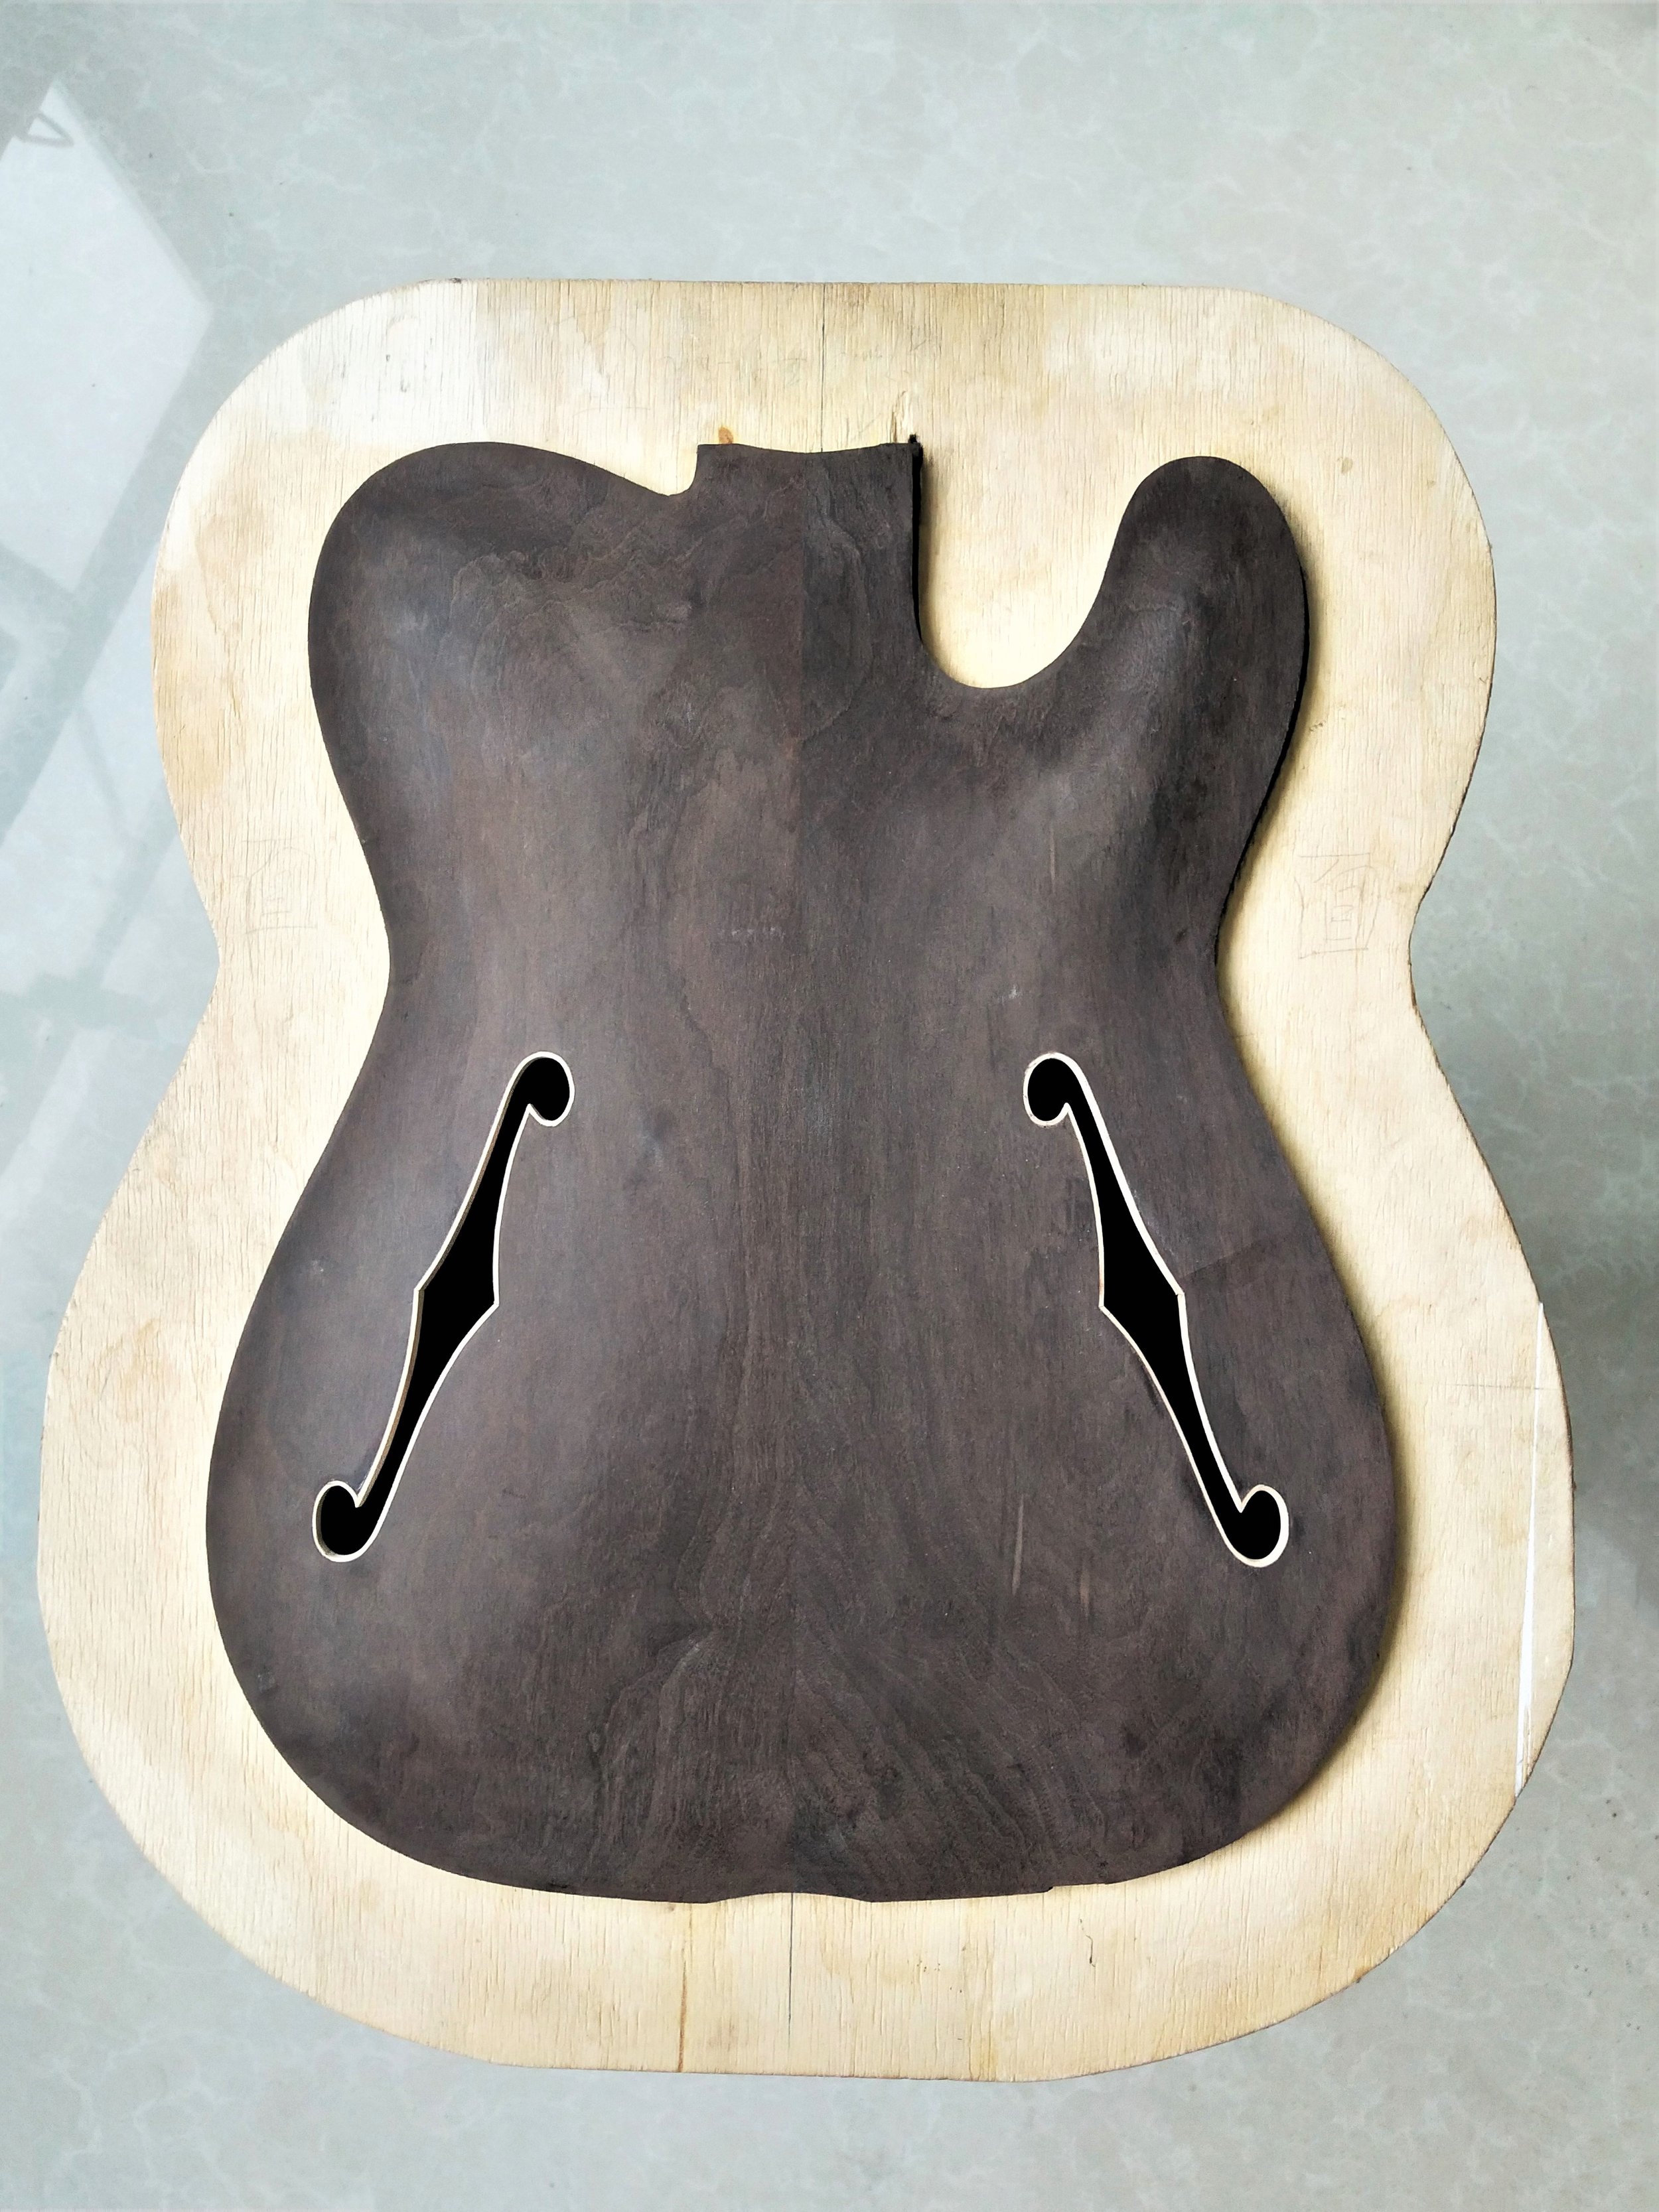 Dejawu Guitars - top with carved f holes